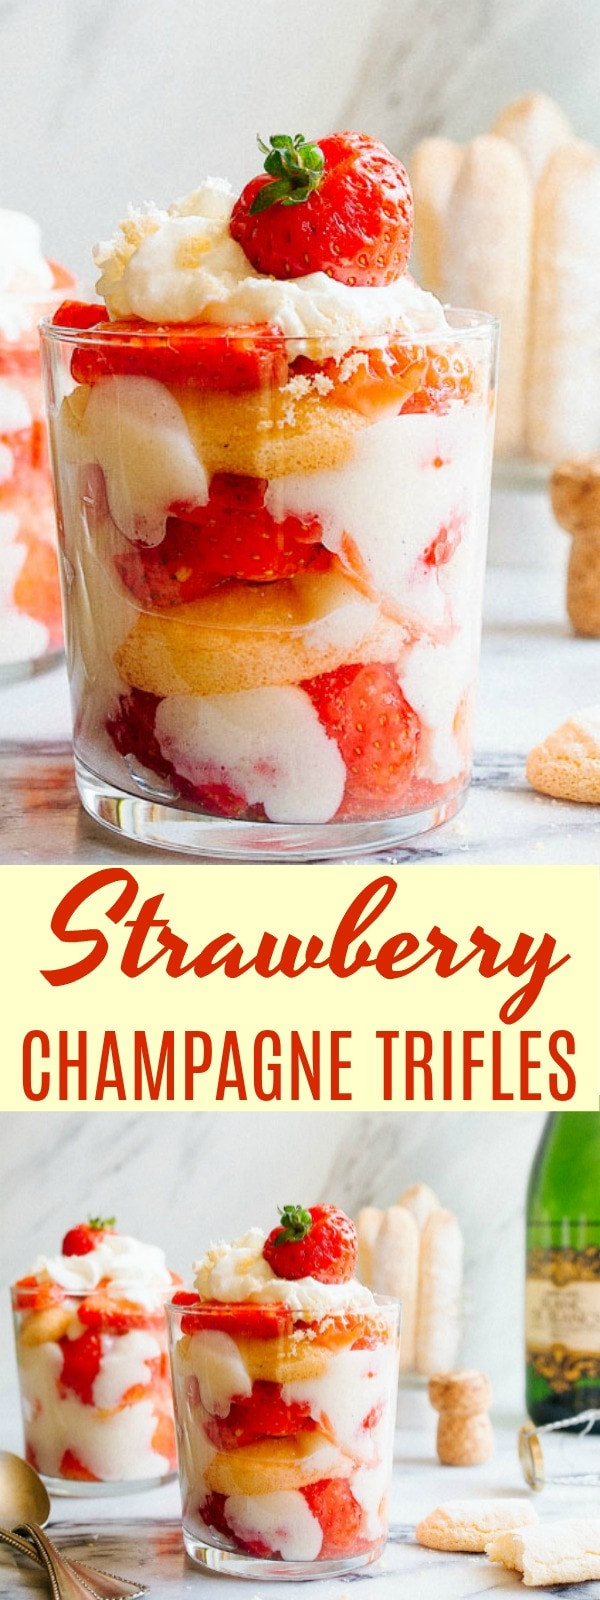 New Year'S Desserts
 Strawberry Champagne Trifles for Two